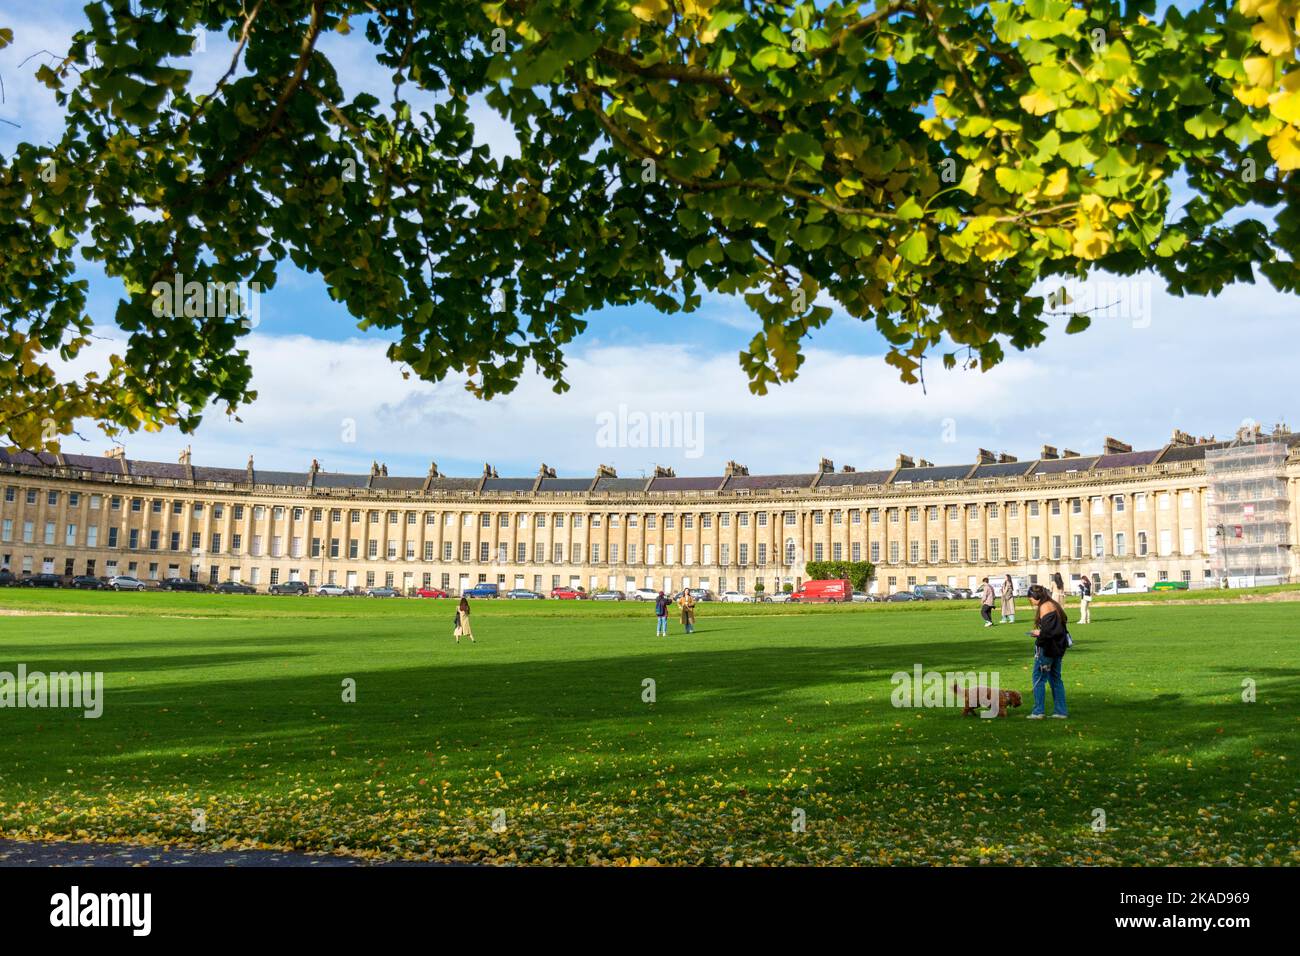 The Royal Crescent, one of Bath's most iconic landmarks, was built between 1767 and 1775 and designed by John Wood the Younger. Bath, Somerset, Englan Stock Photo